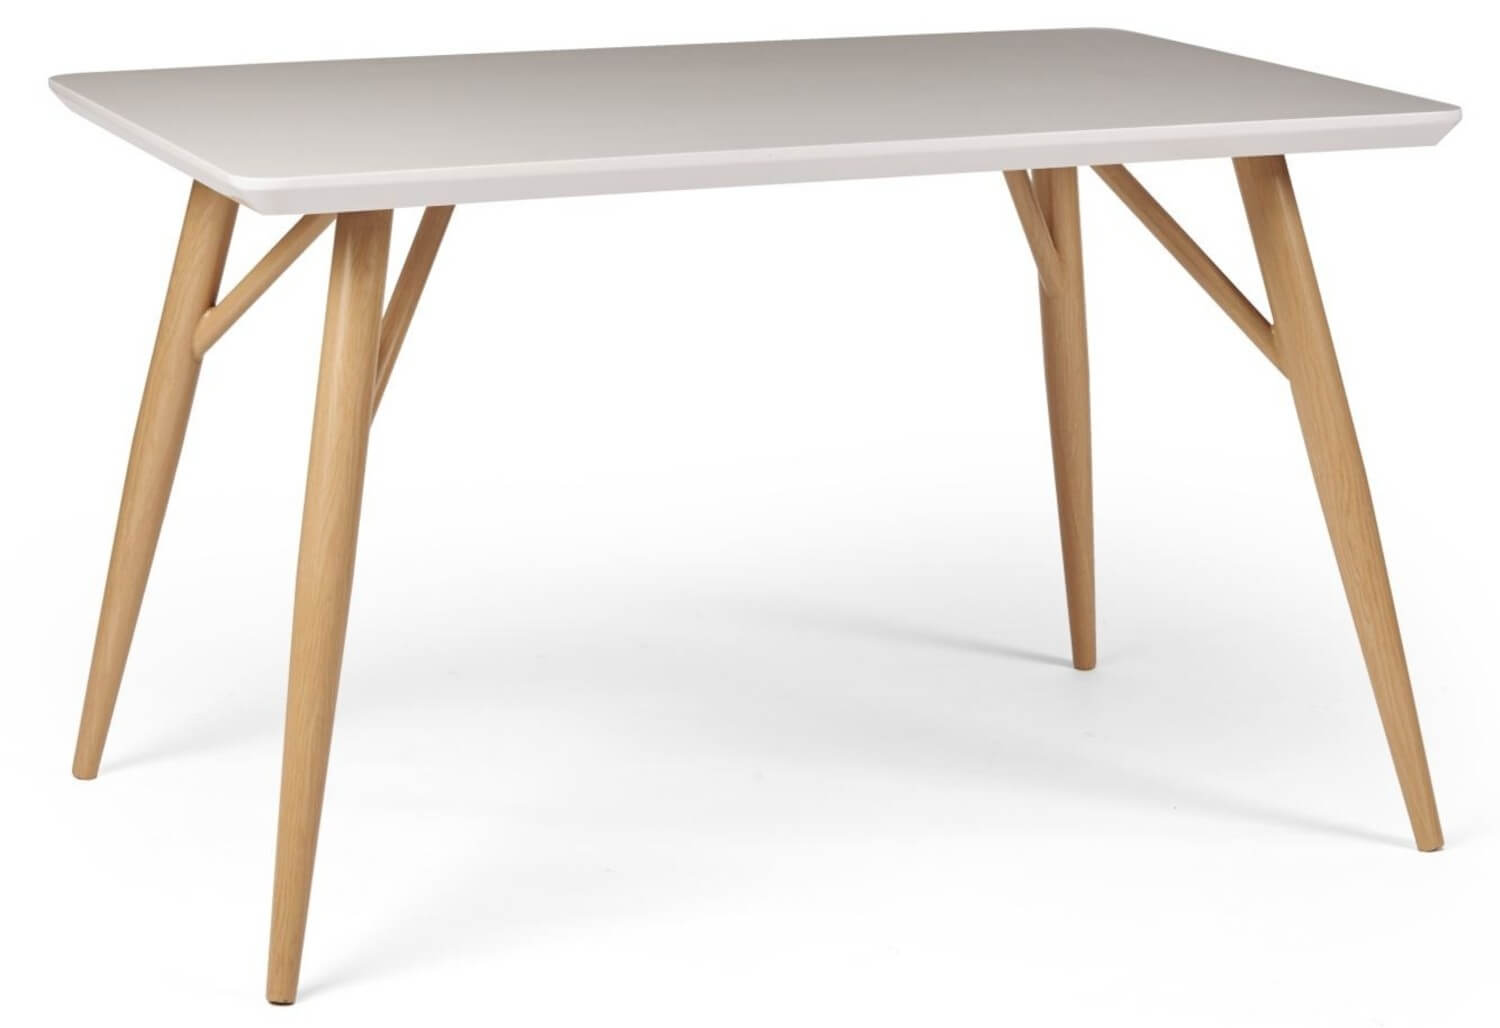 Showing image for Erica dining table